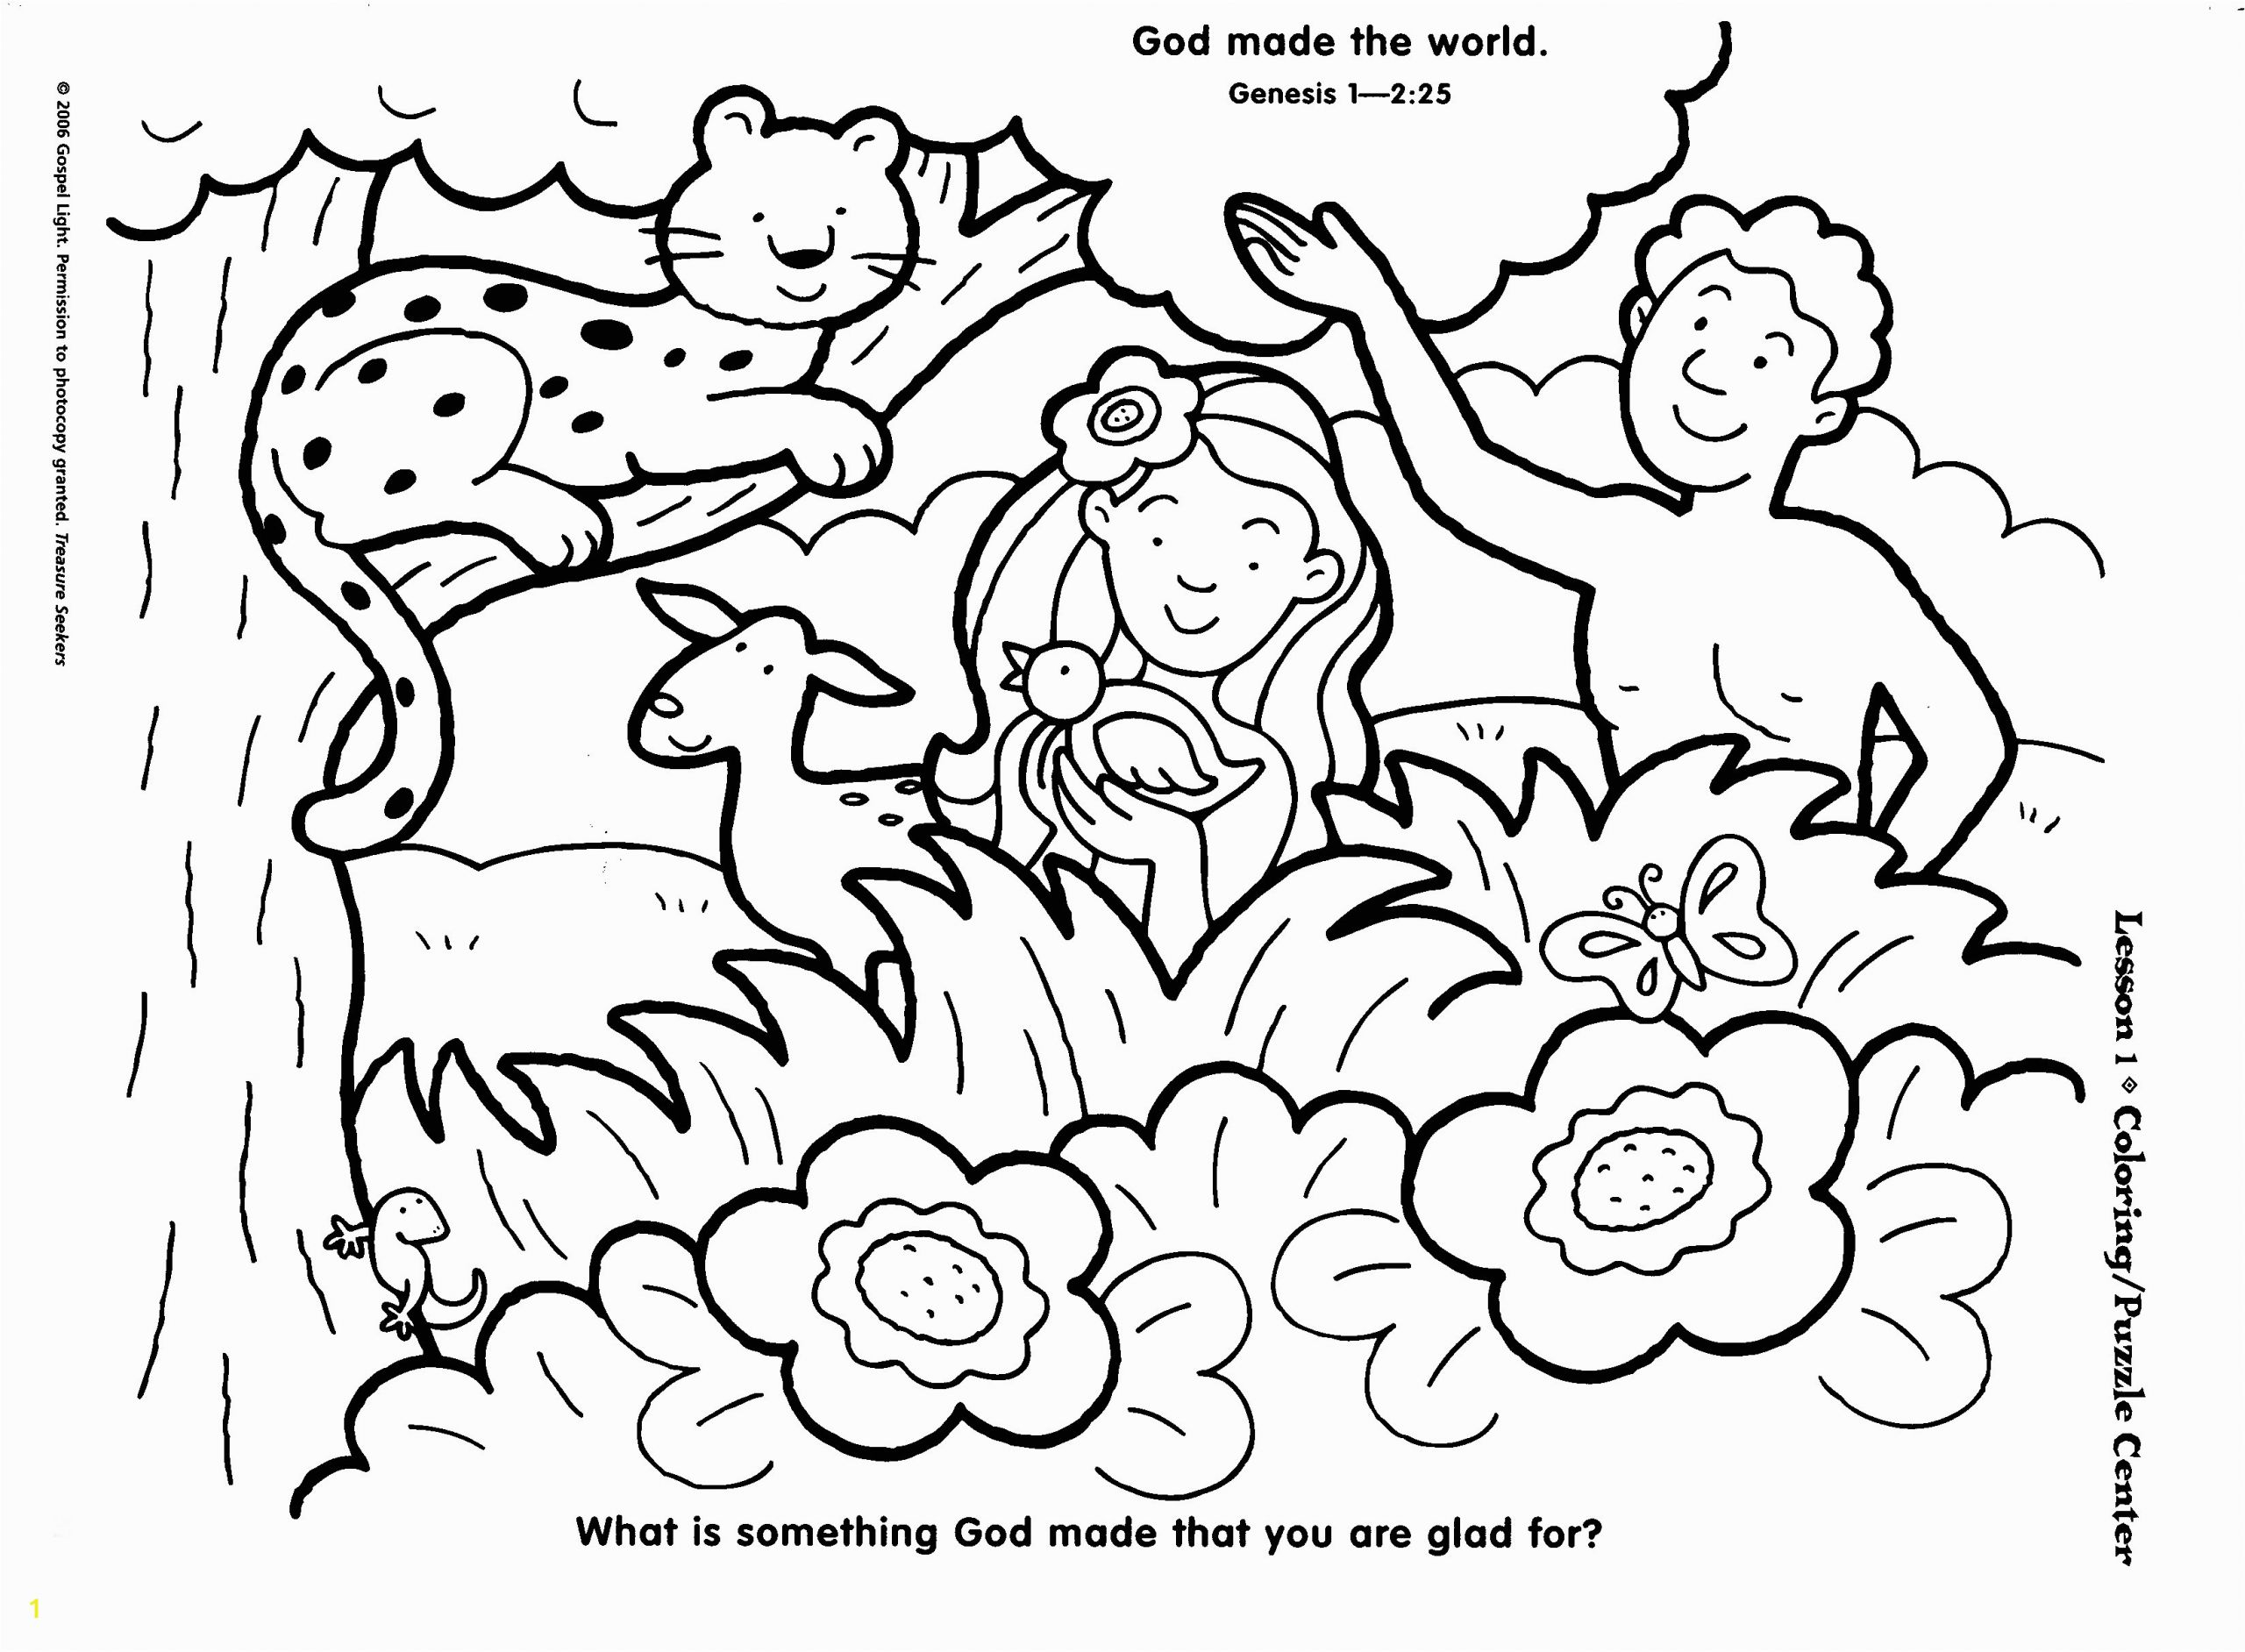 Garden Of Eden Coloring Pages Free Printable Garden Eden Coloring Pages at Getcolorings